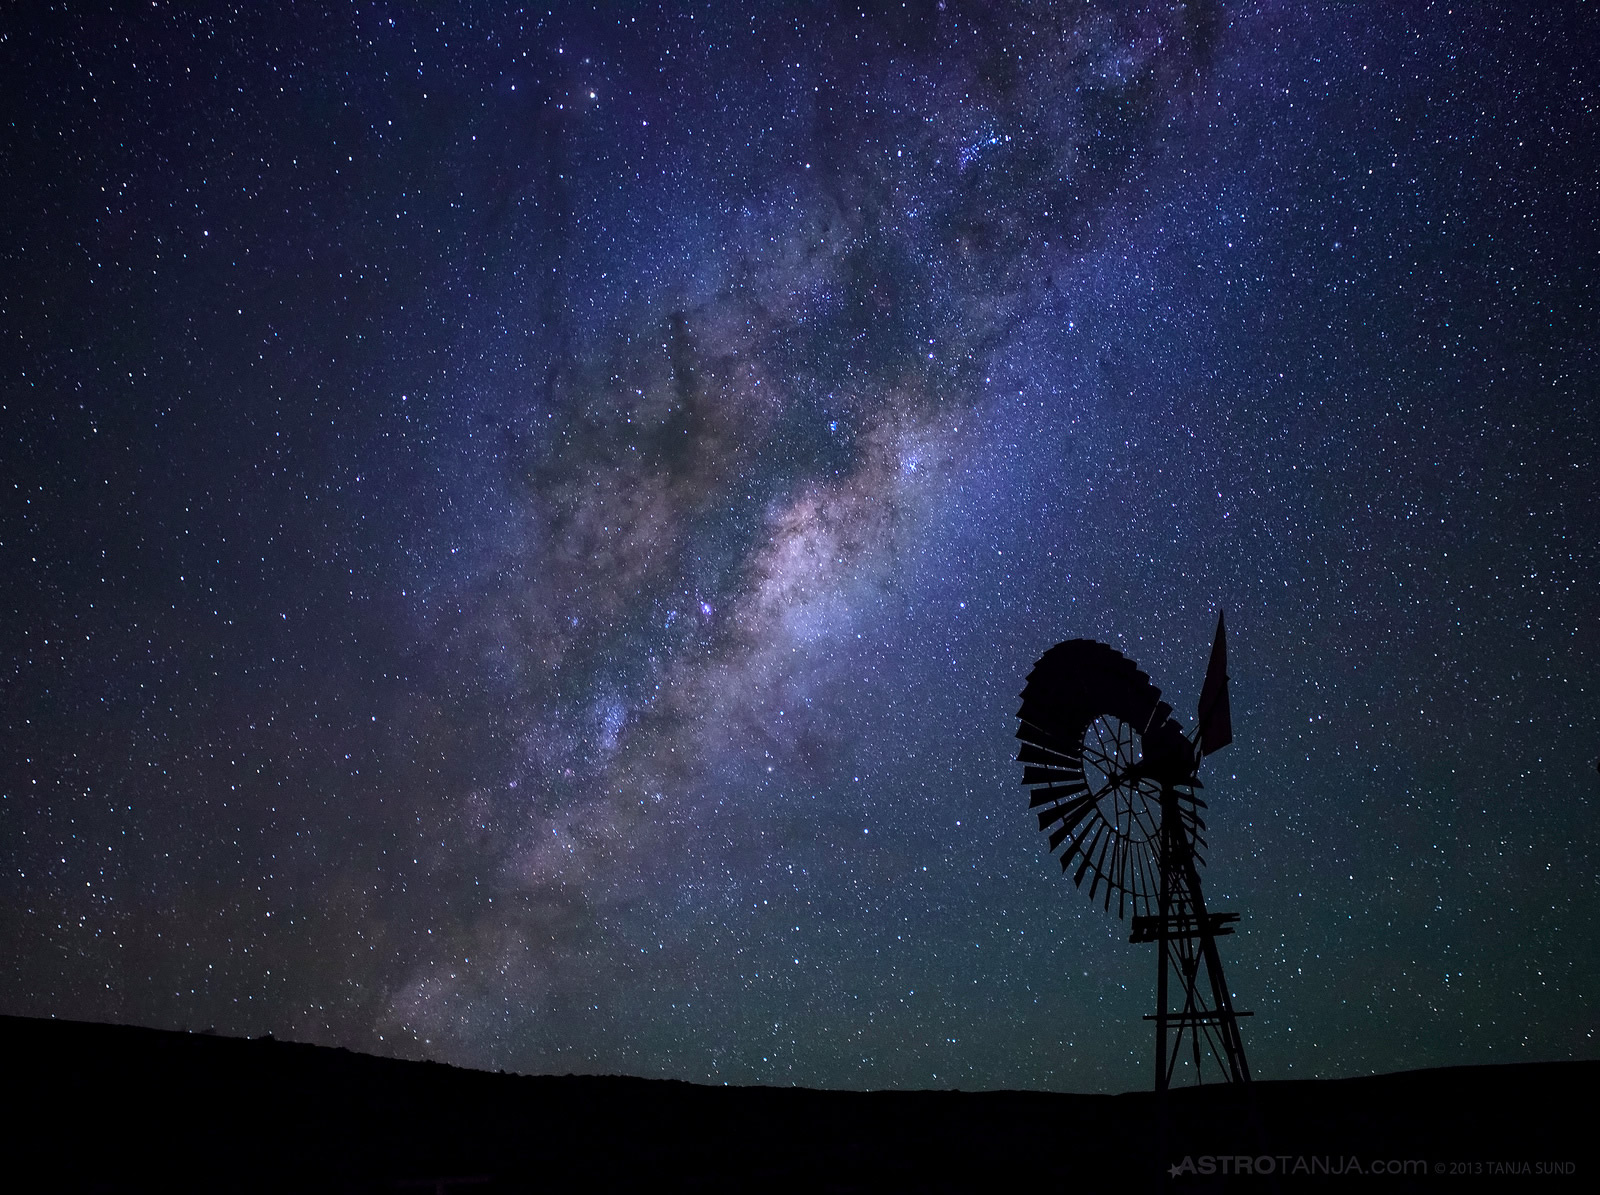 Rising Star — A South African Astronomy Journey